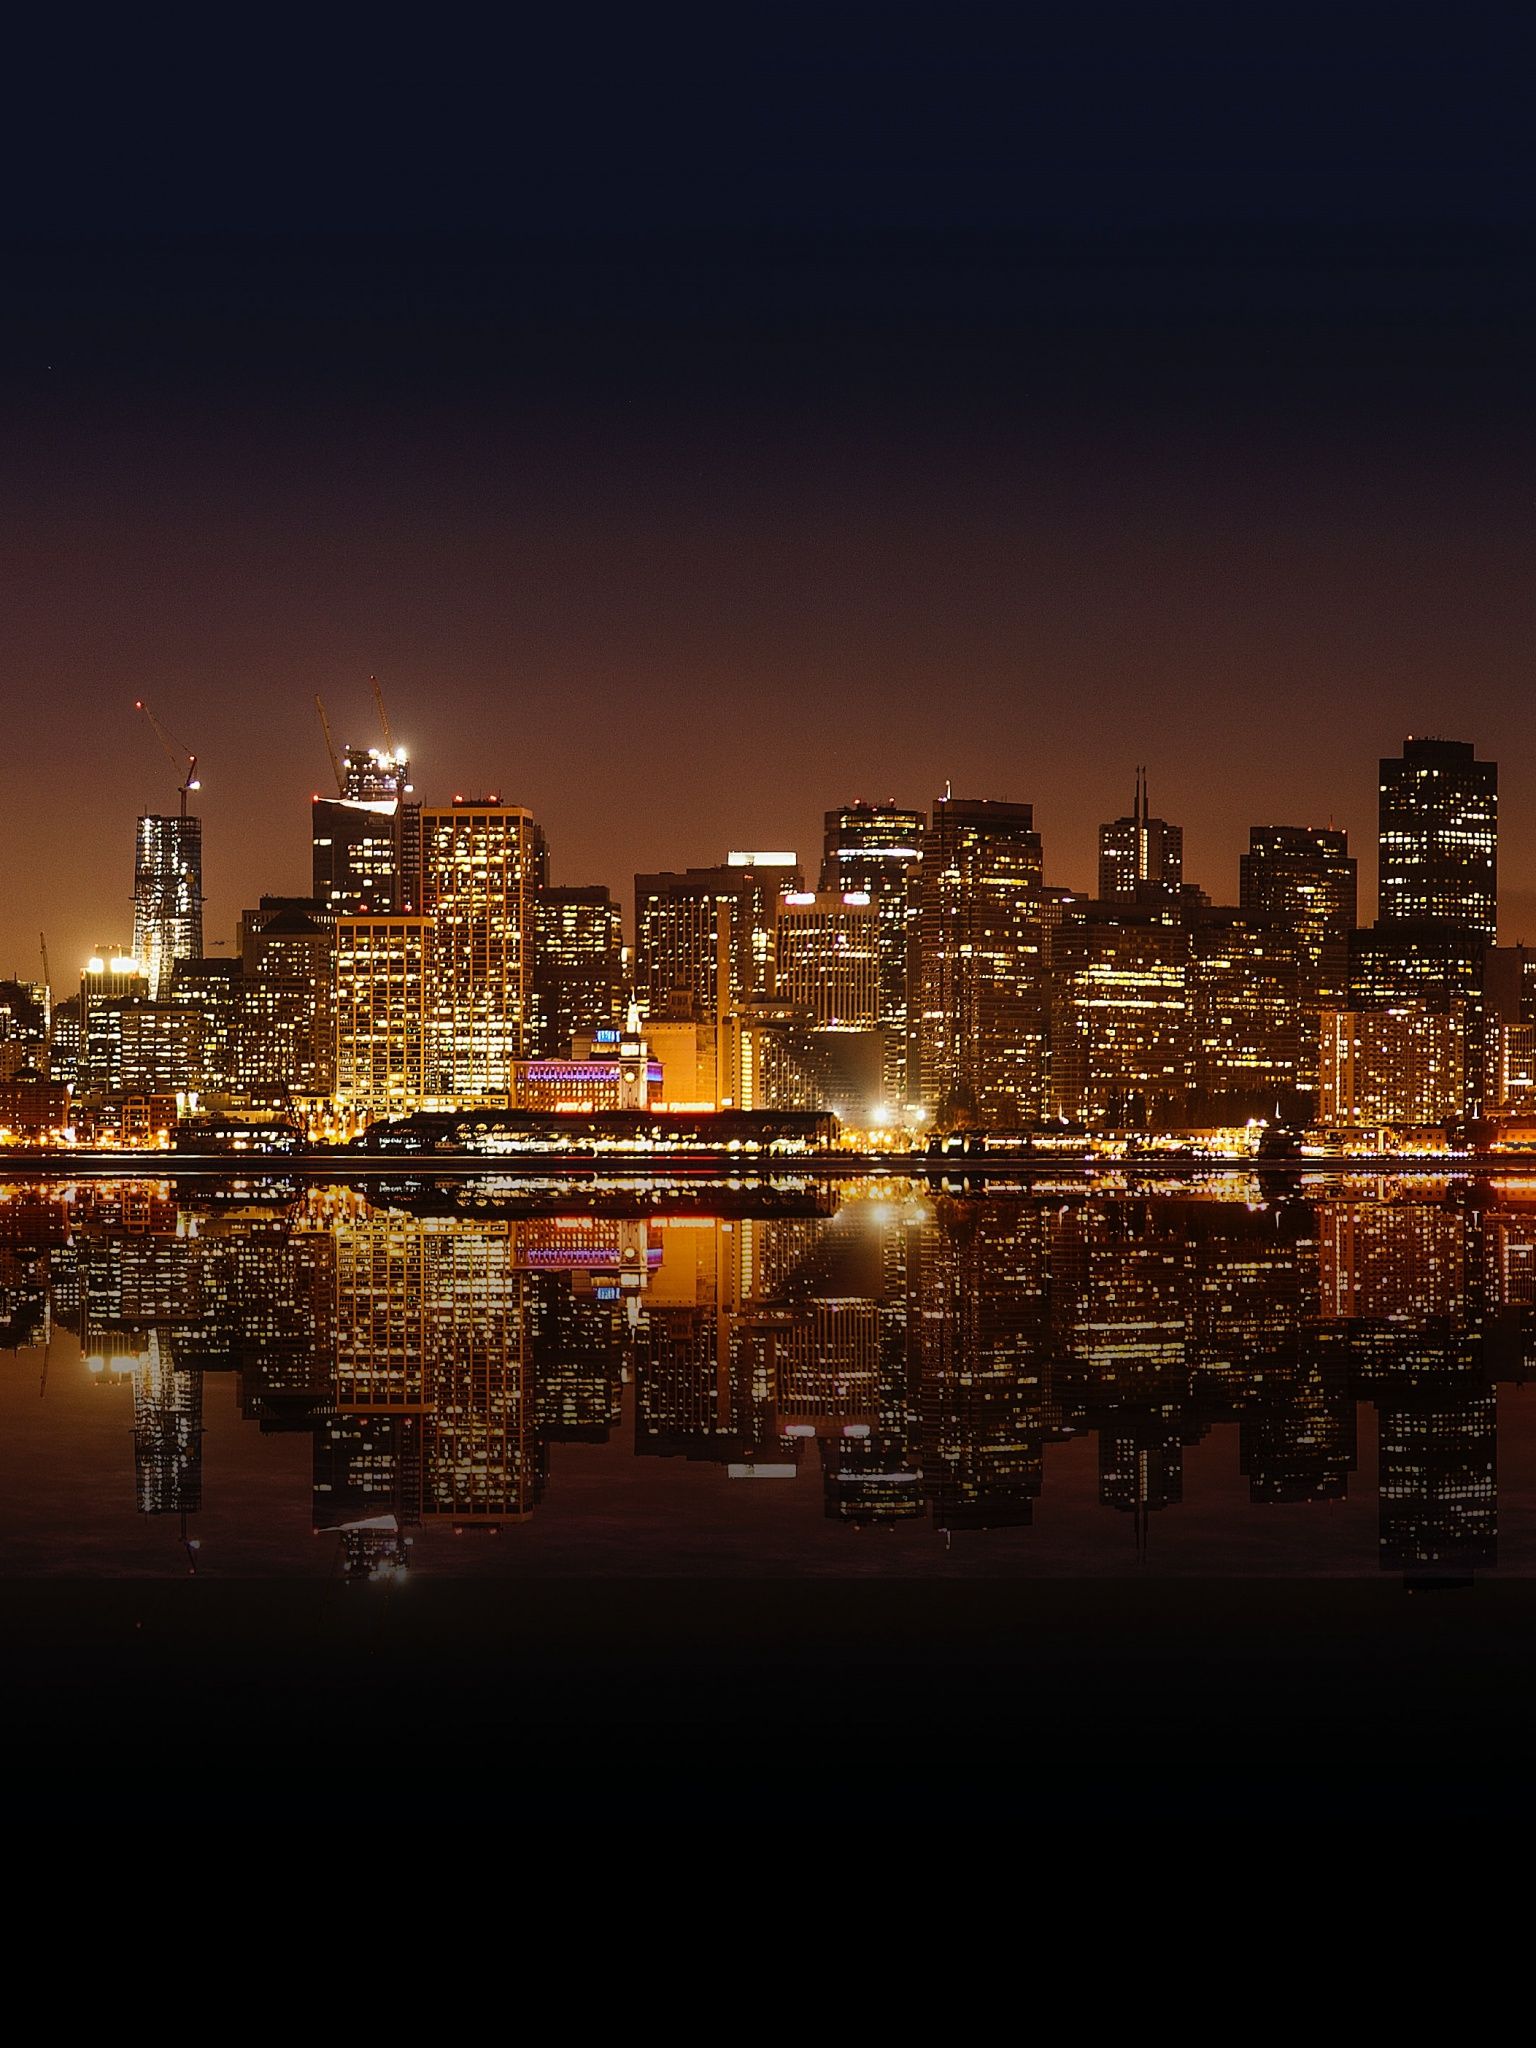 A city skyline at night with water in the foreground - City, skyline